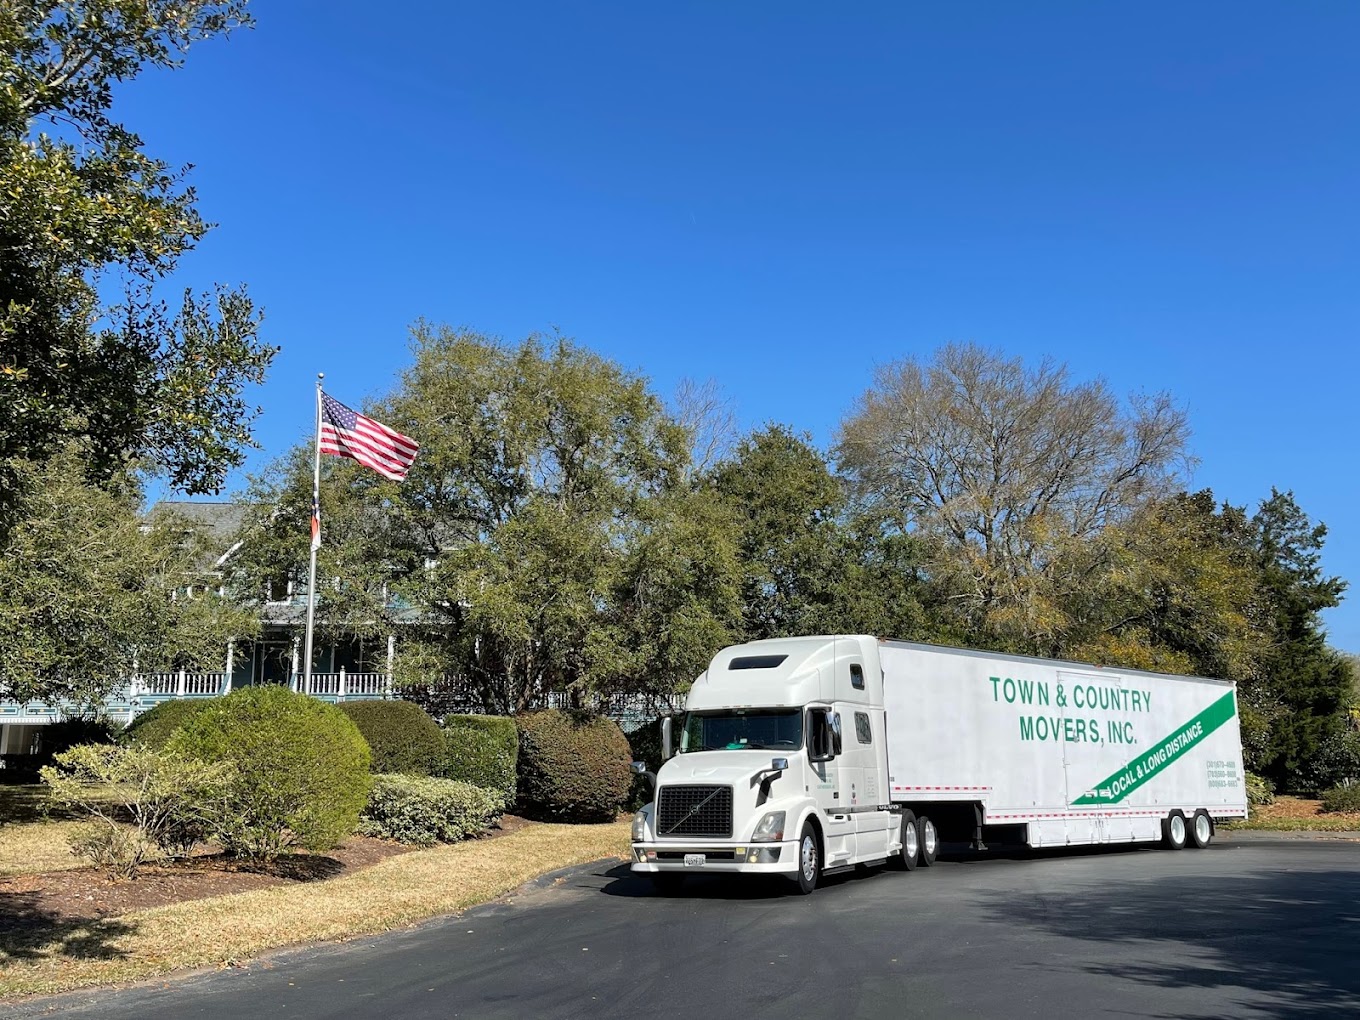 Town & Country Movers, Inc. Long Distance Moving in the DC Metro Area